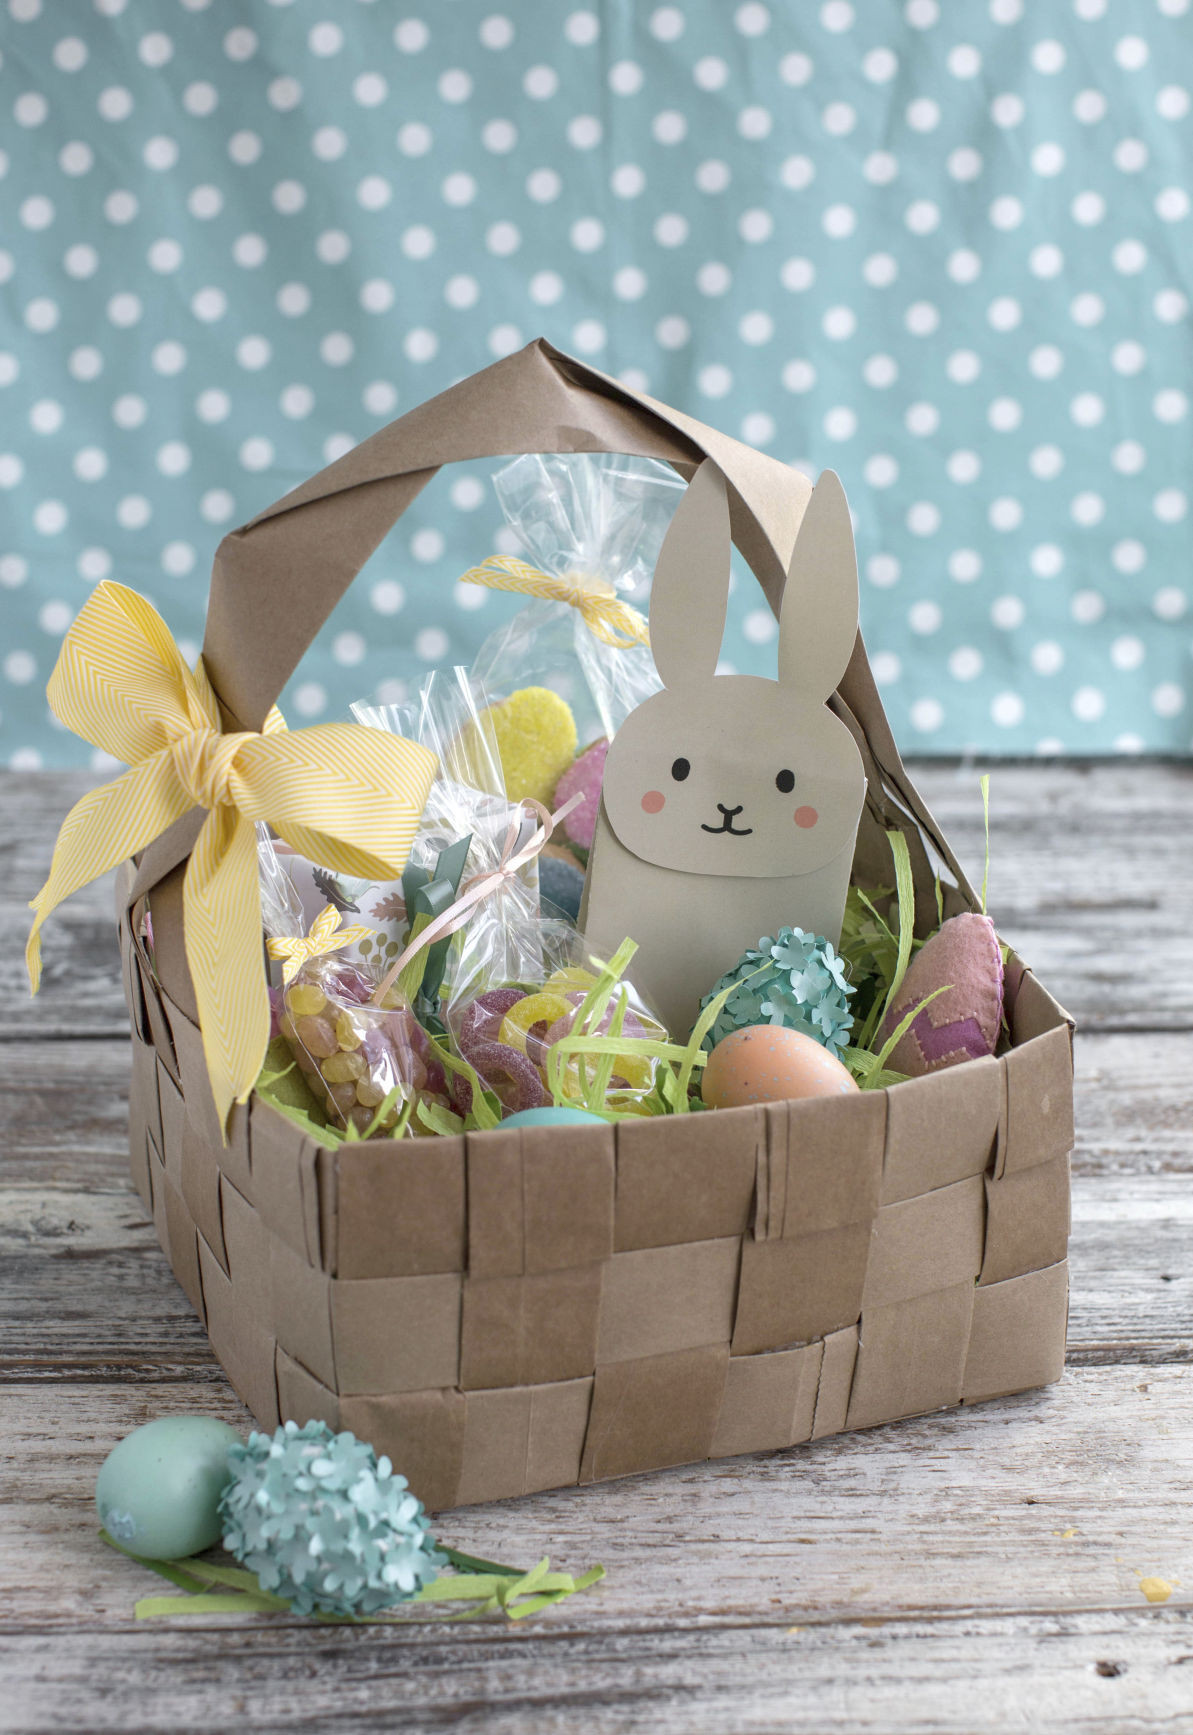 Diy Easter Basket Fresh Hop to It 5 Ways to Creative with Easter Baskets